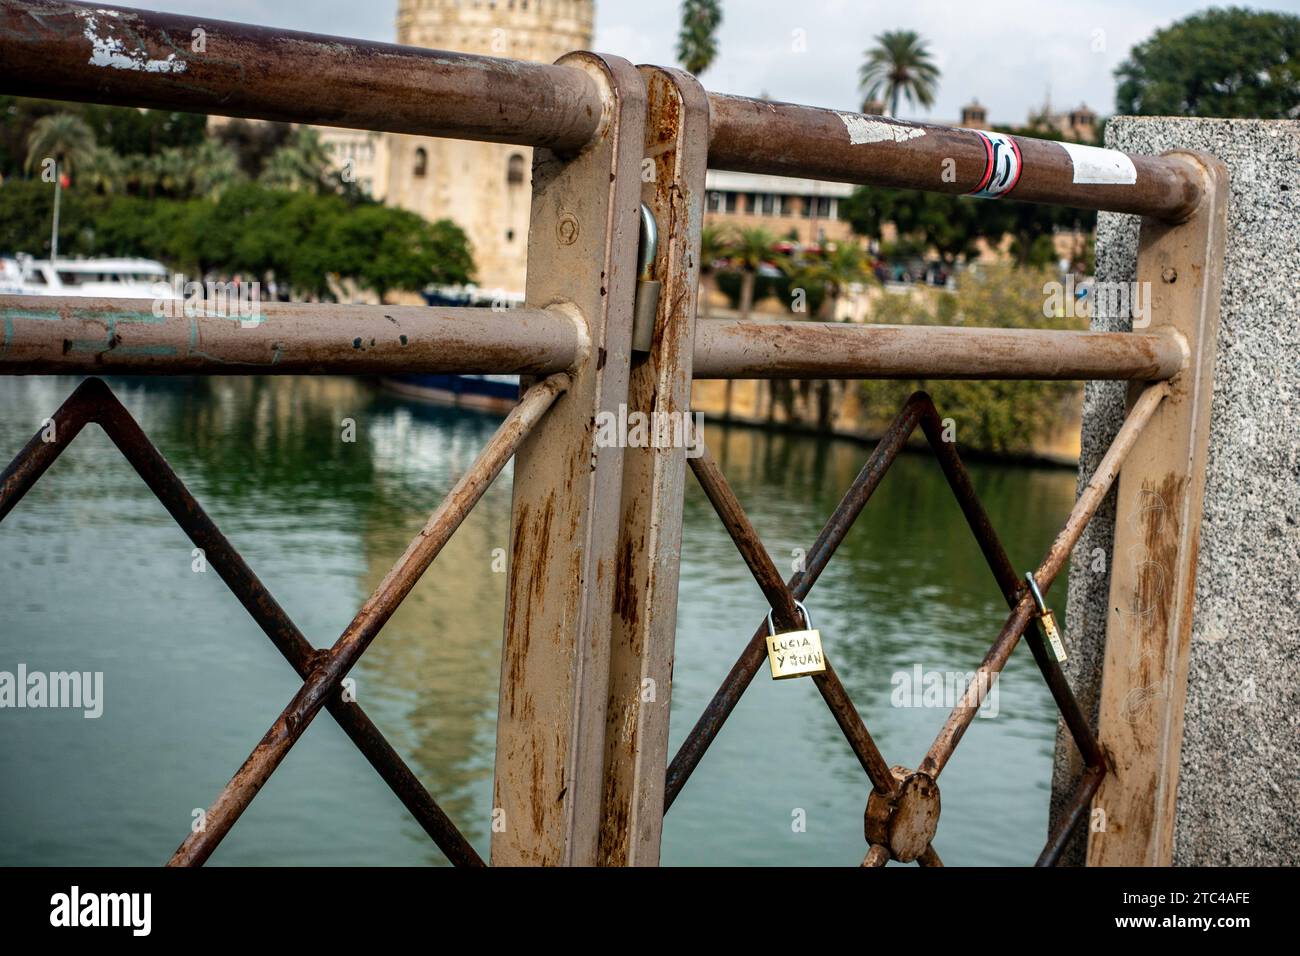 A close-up view of love locks attached to a rusty railing with Torre del Oro, Seville, Spain,  in the background. Stock Photo